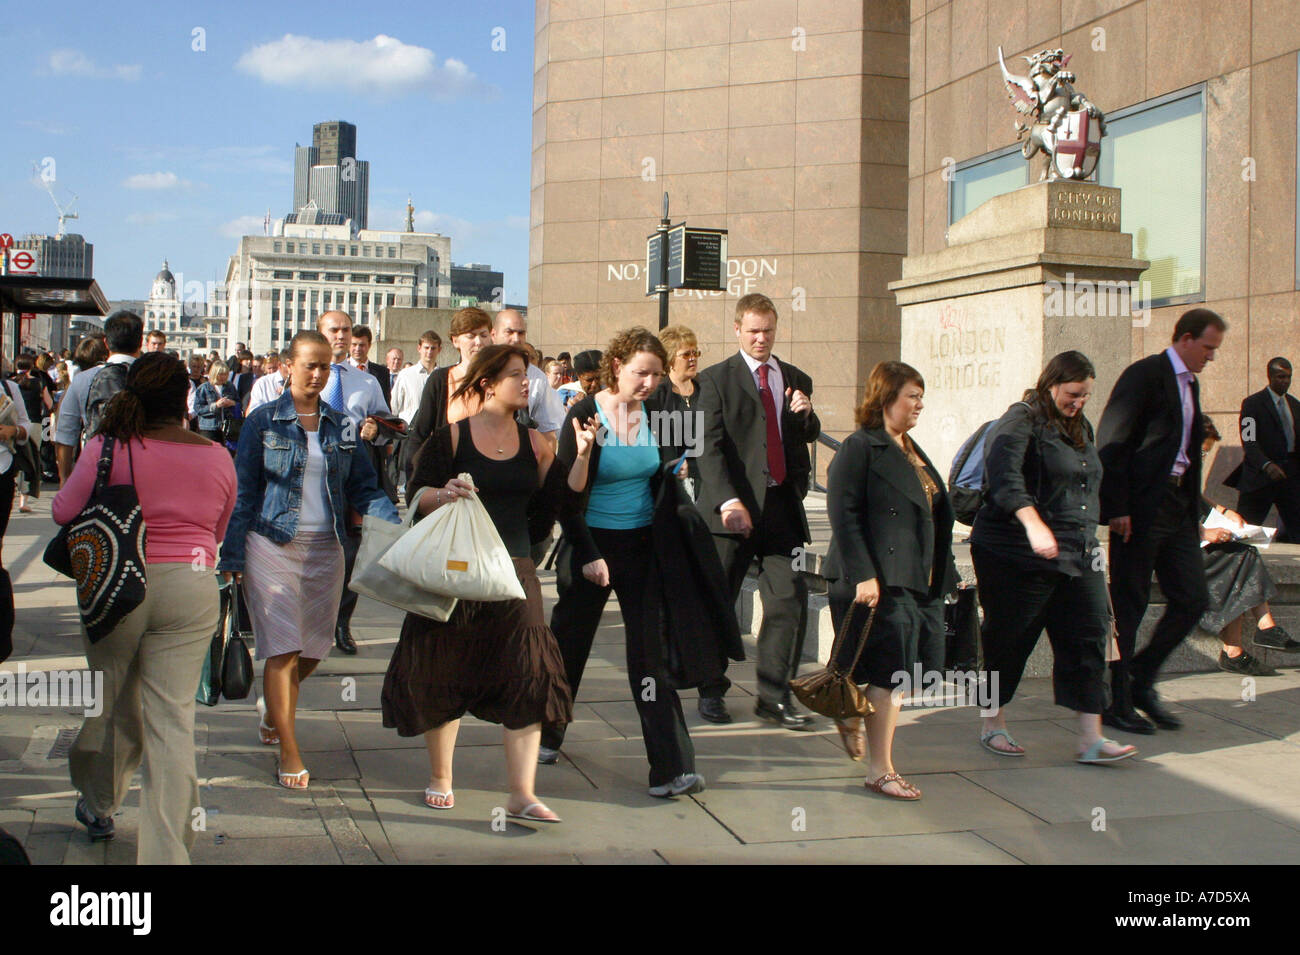 London commuters on their way to work Stock Photo